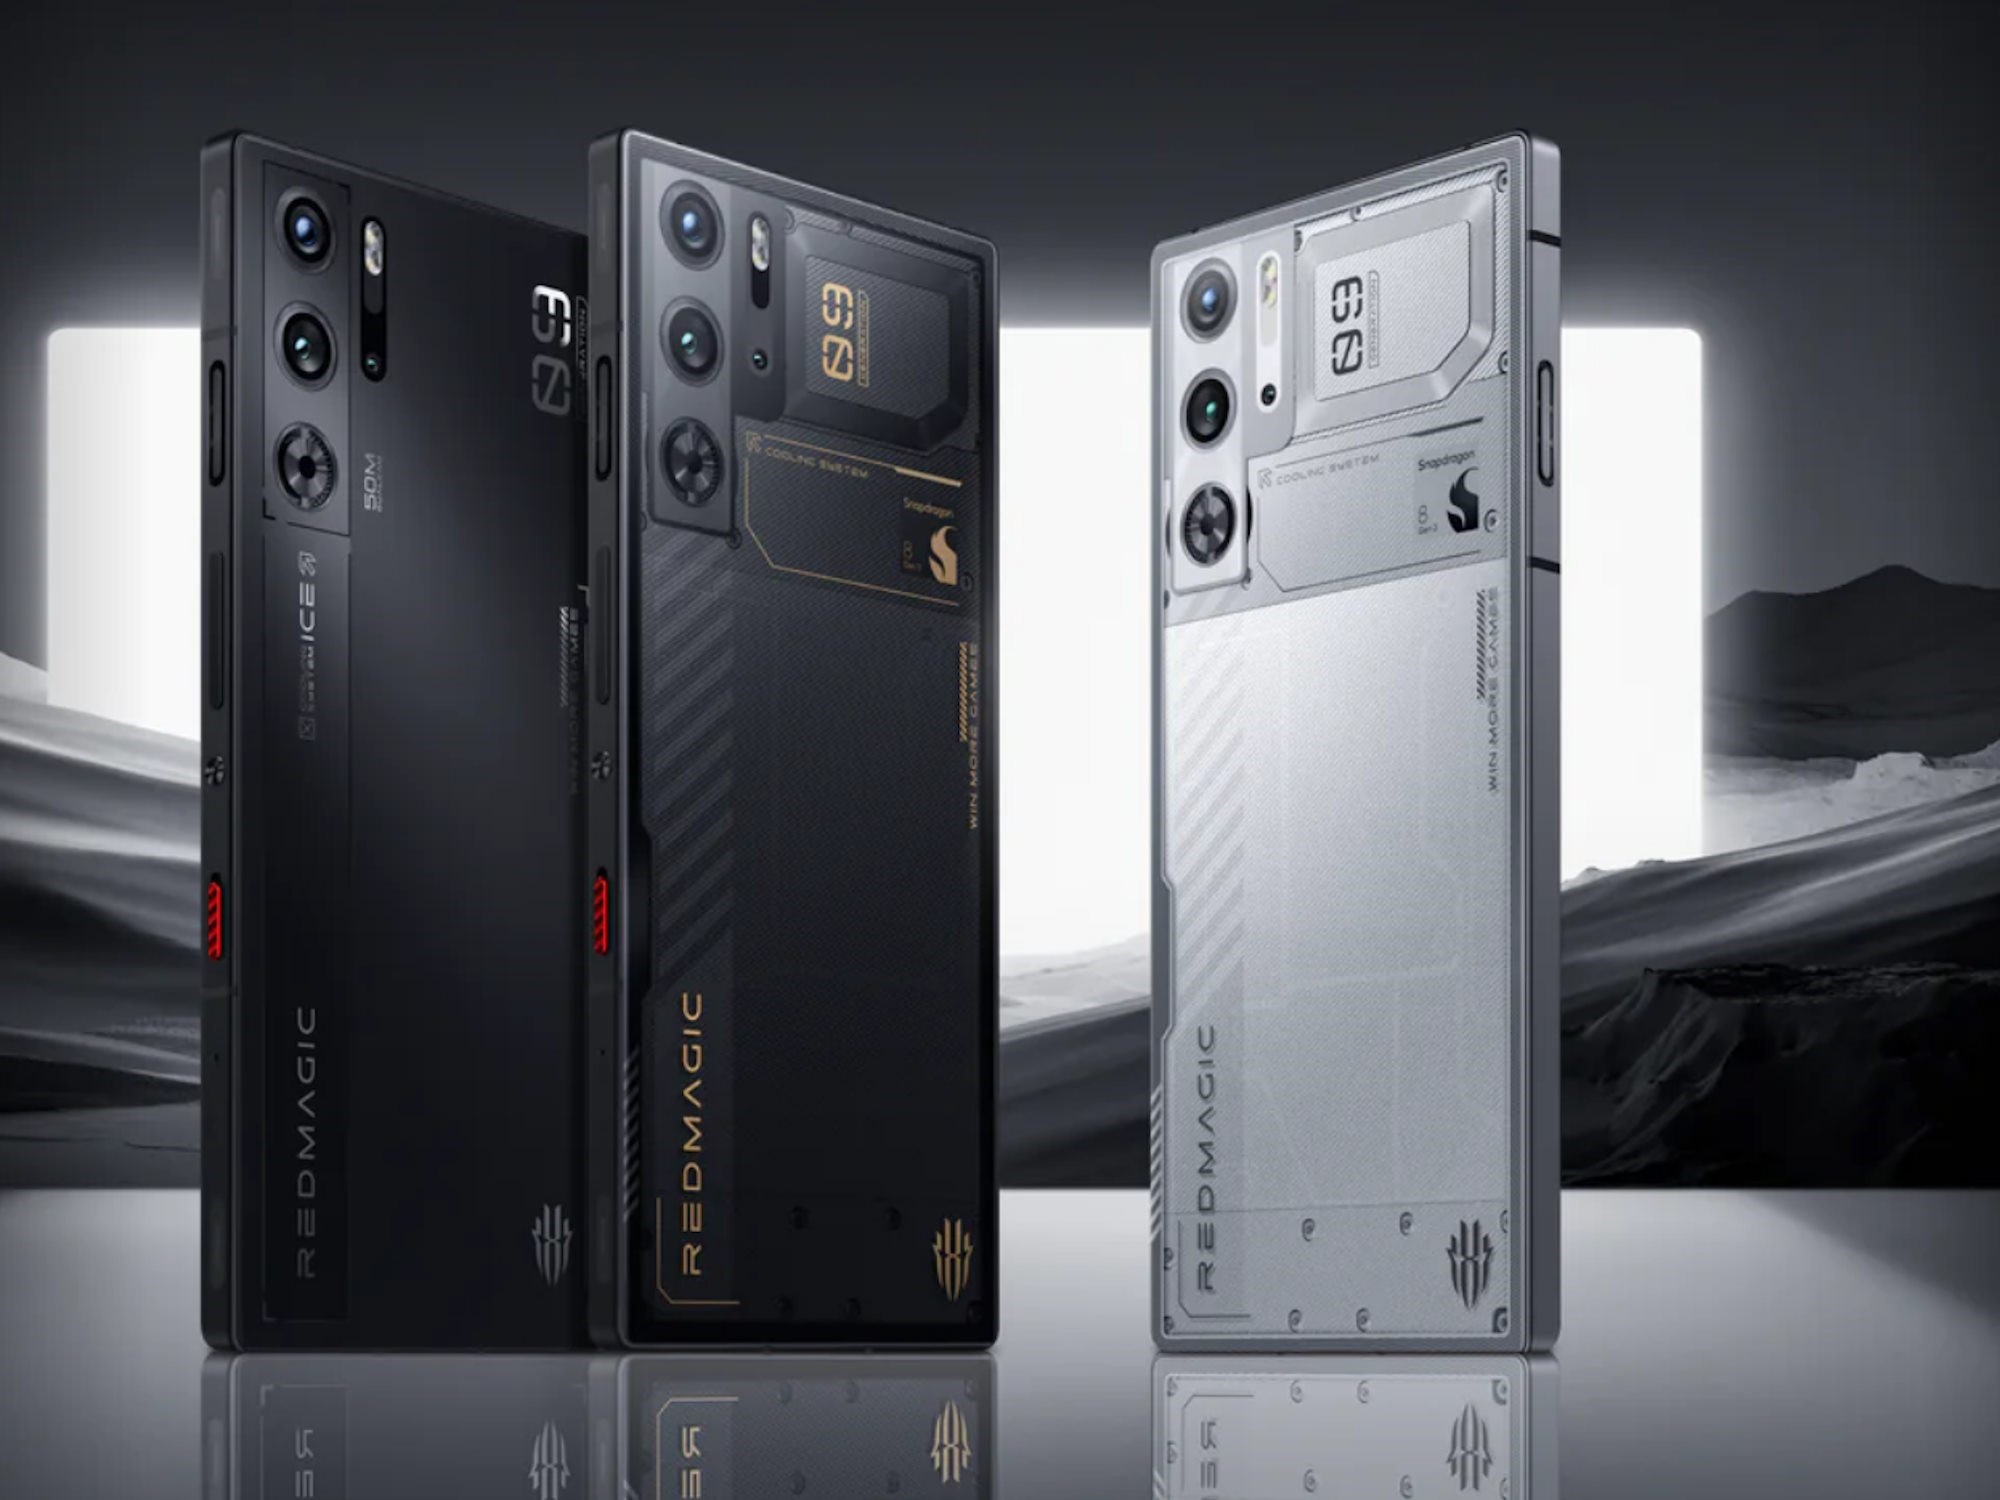 Red Magic 9 Pro promises better performance and battery life for gamers -  PhoneArena